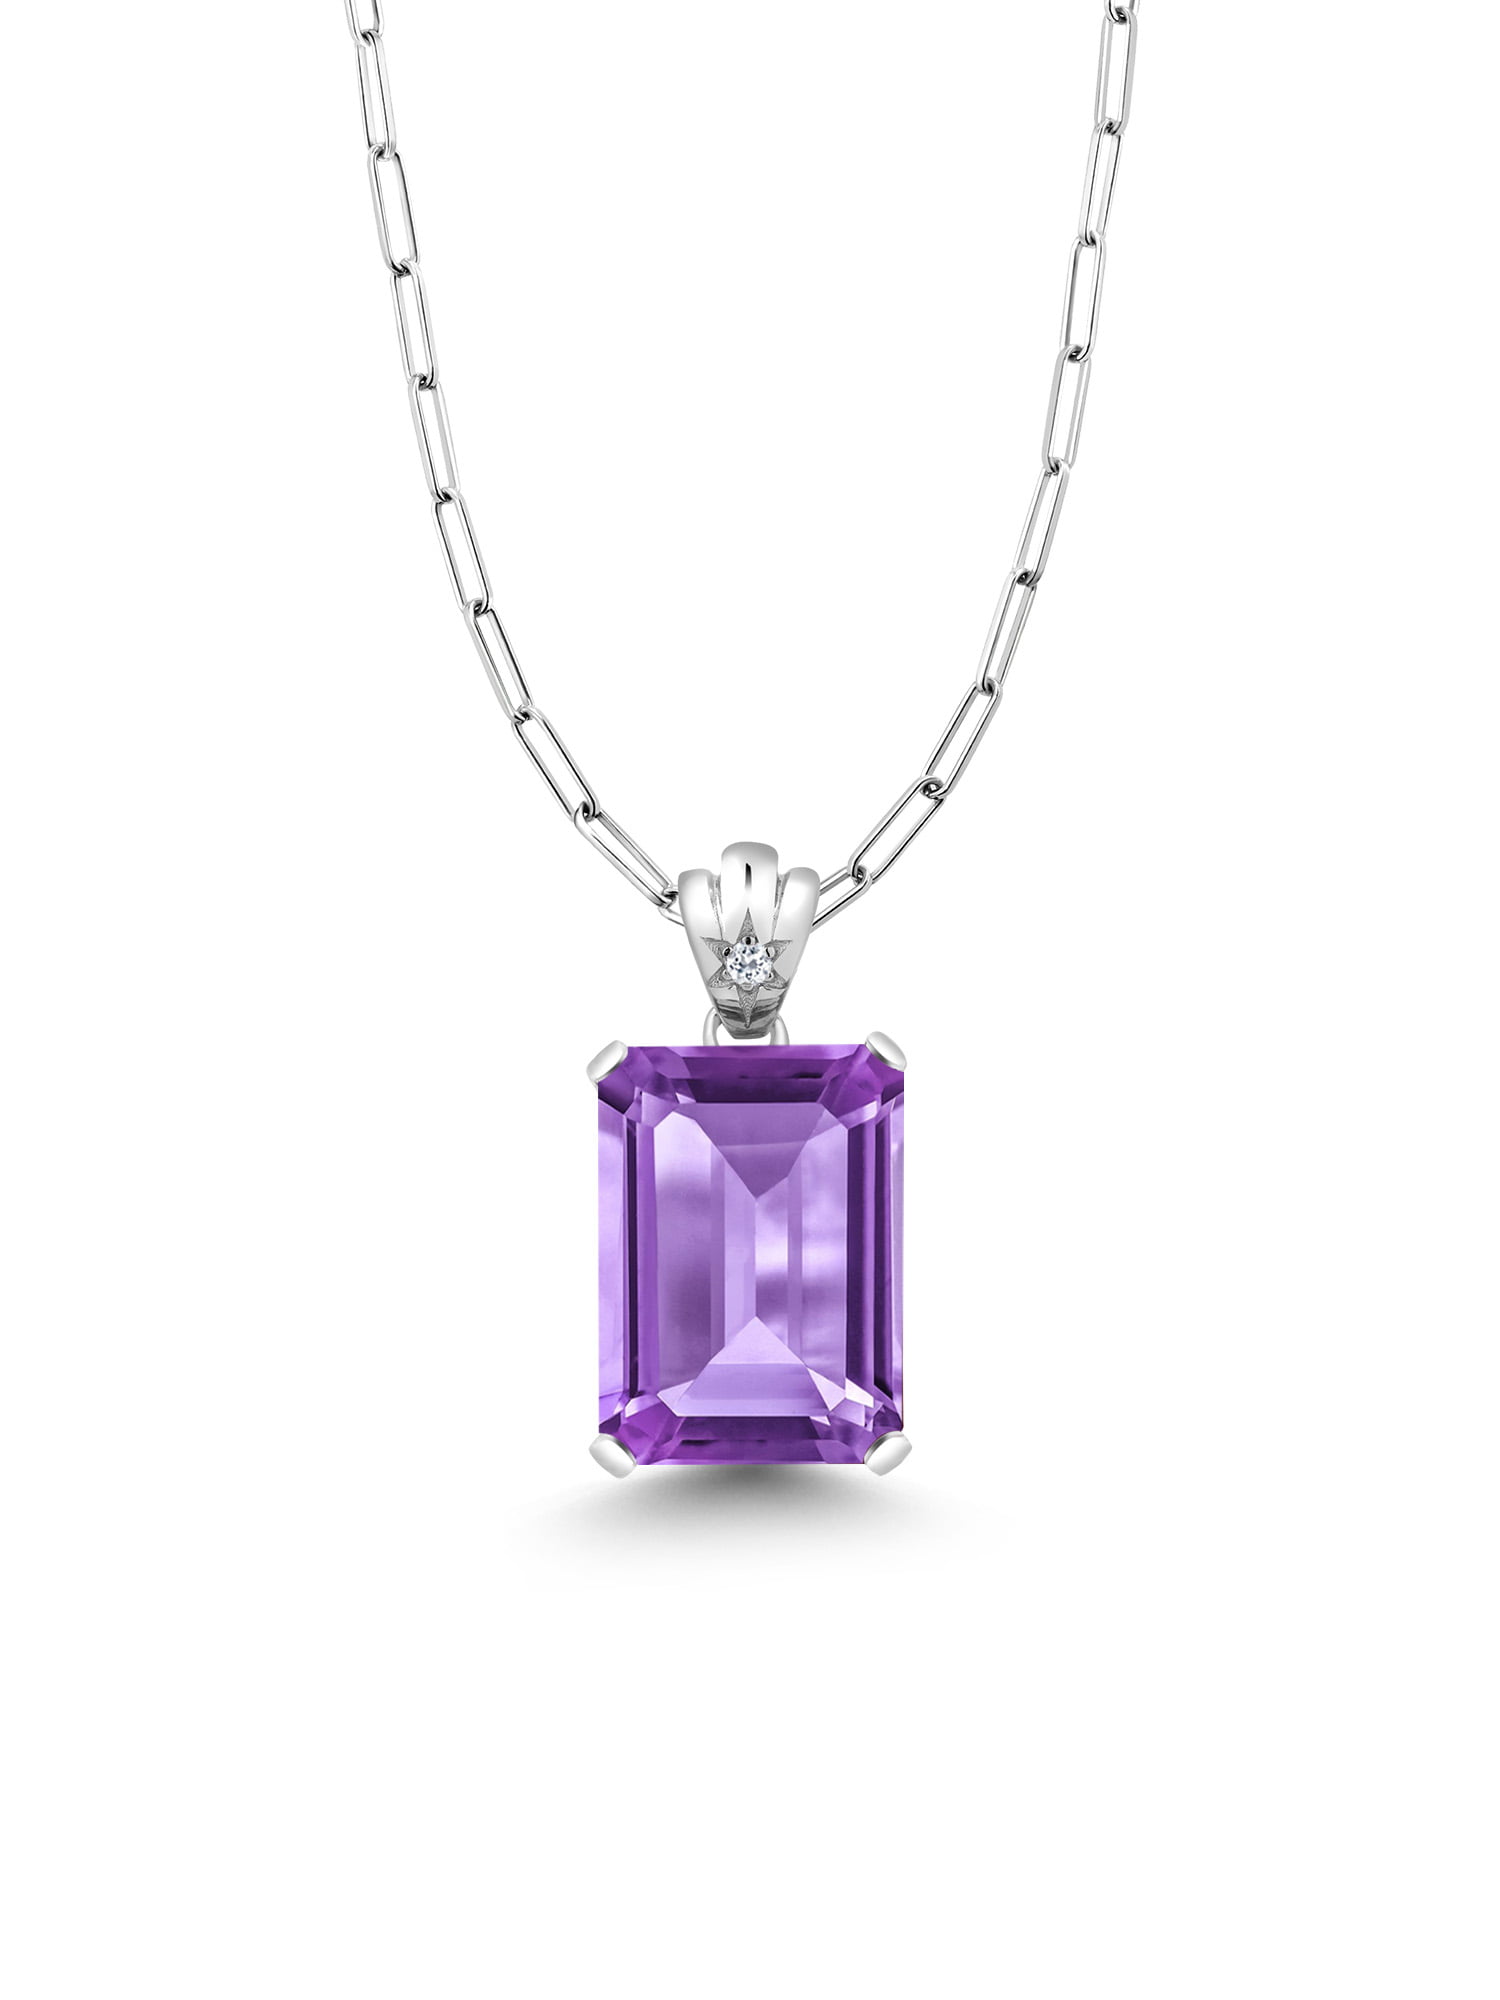 Gem Stone King 3.14 Ct Round Purple Amethyst White Topaz 925 Sterling Silver Womens Pendant 18 inches Chain